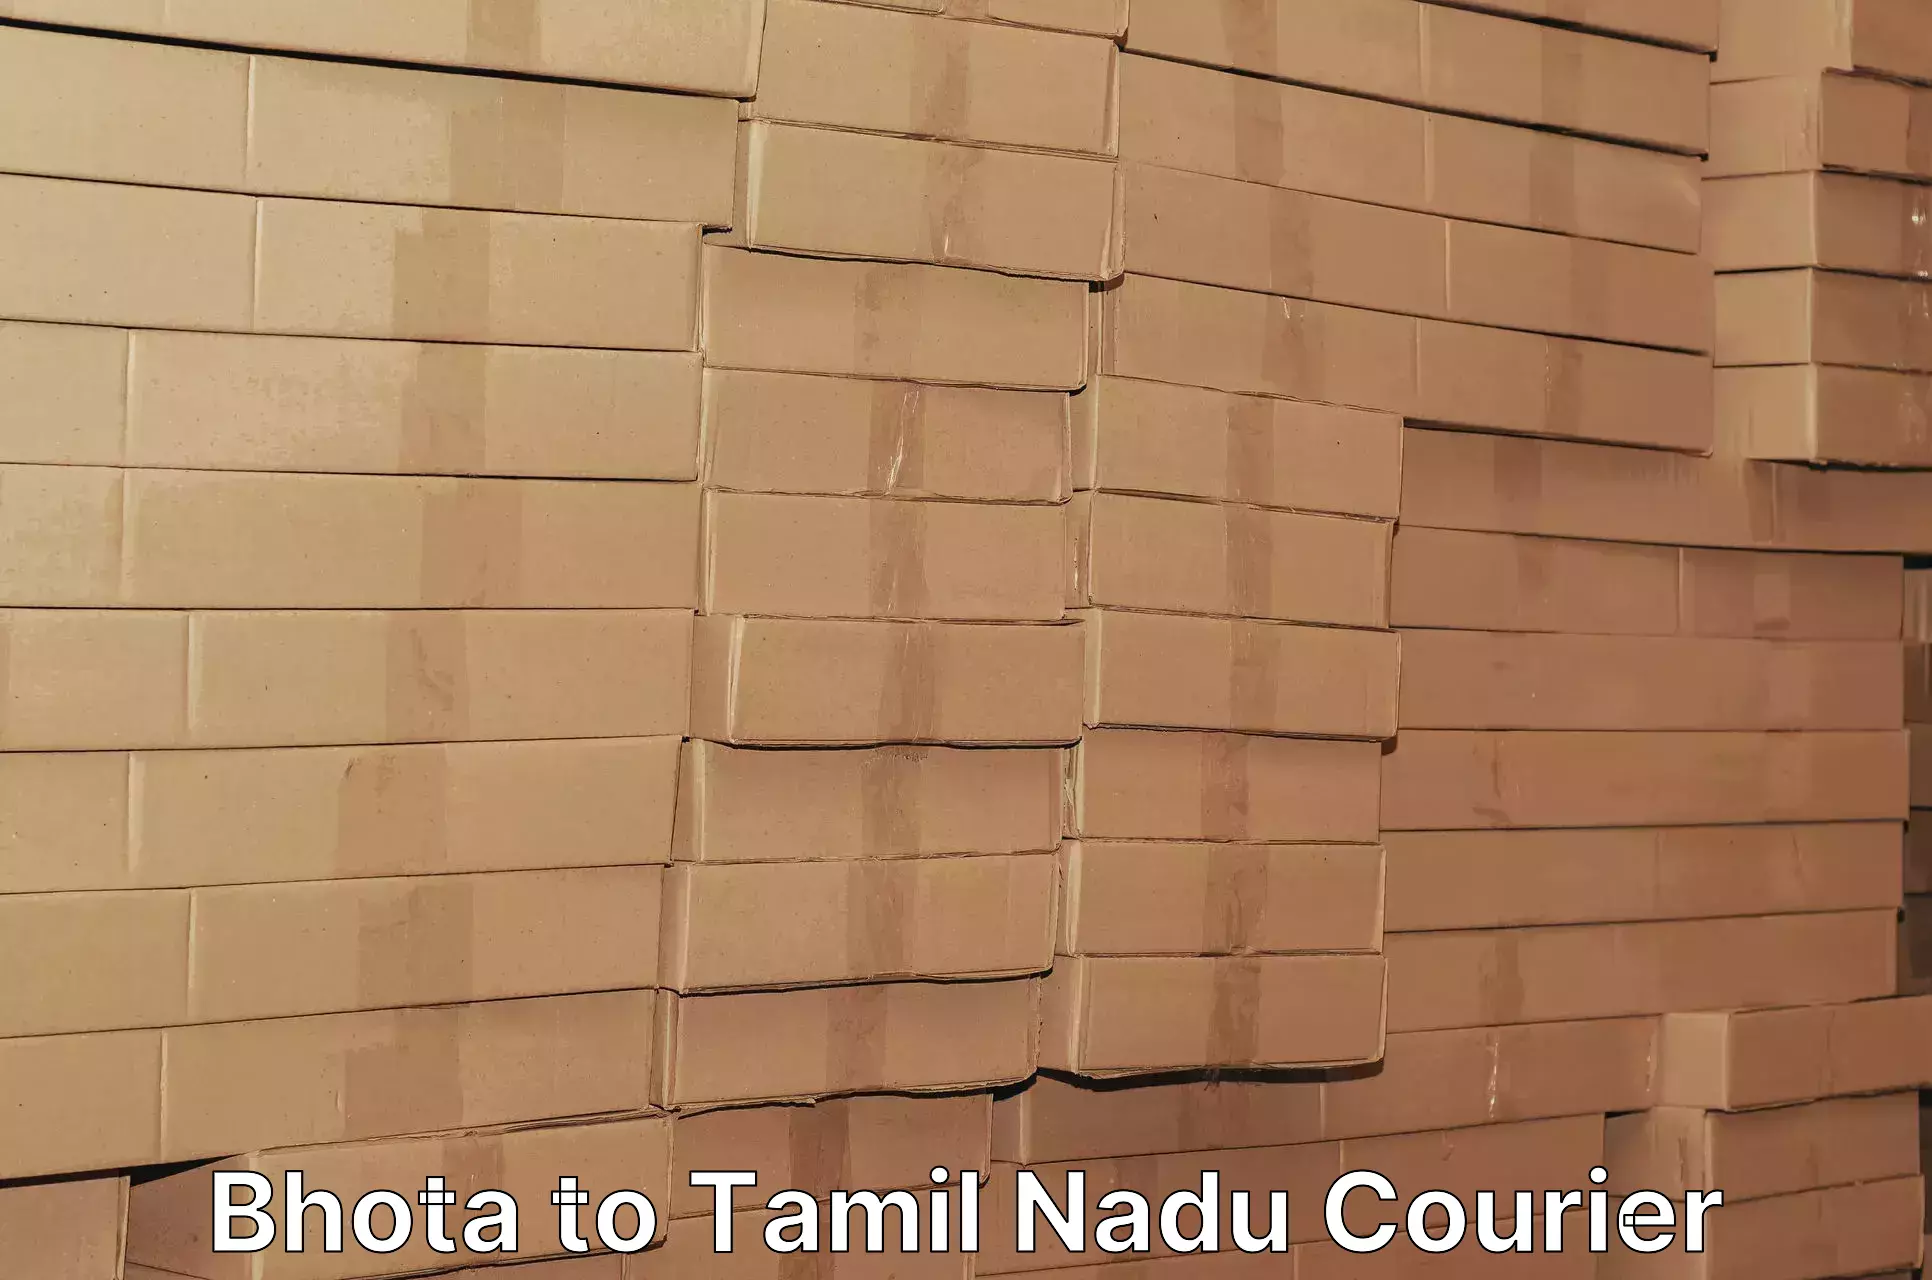 Efficient courier operations Bhota to Tamil Nadu